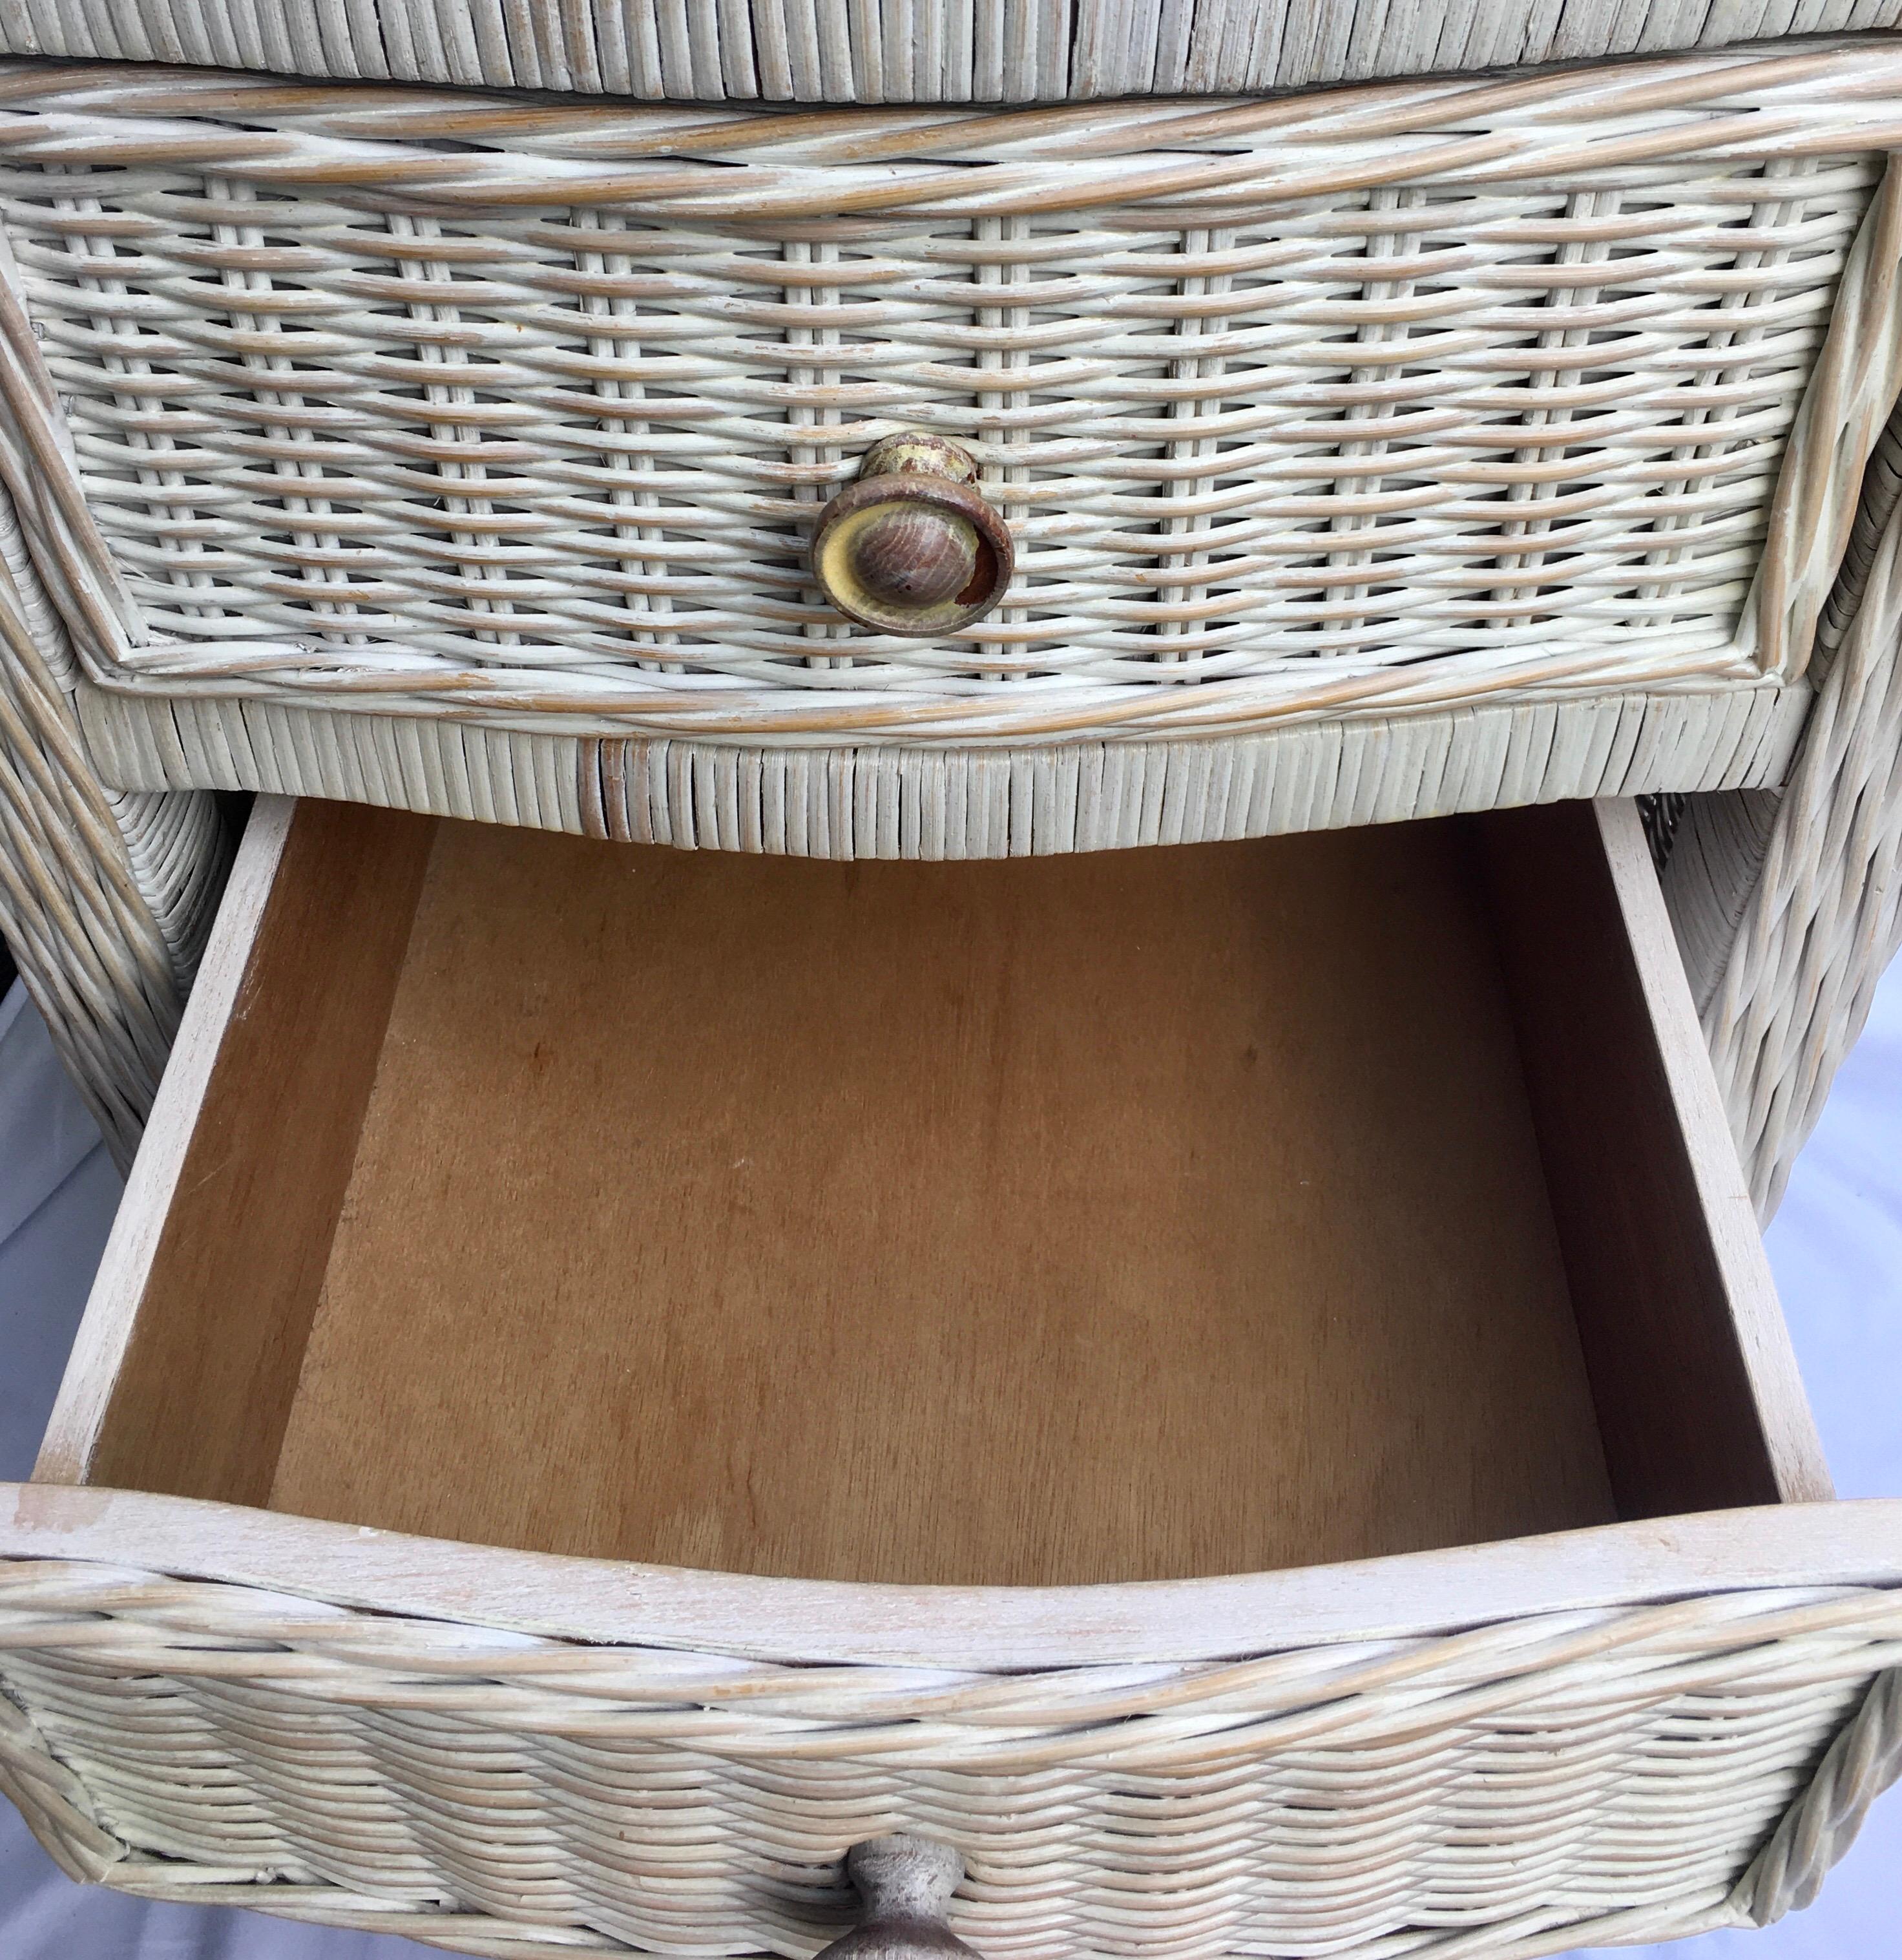 20th Century Tall Wicker Curved Serpentine Lingerie Chest of Drawers